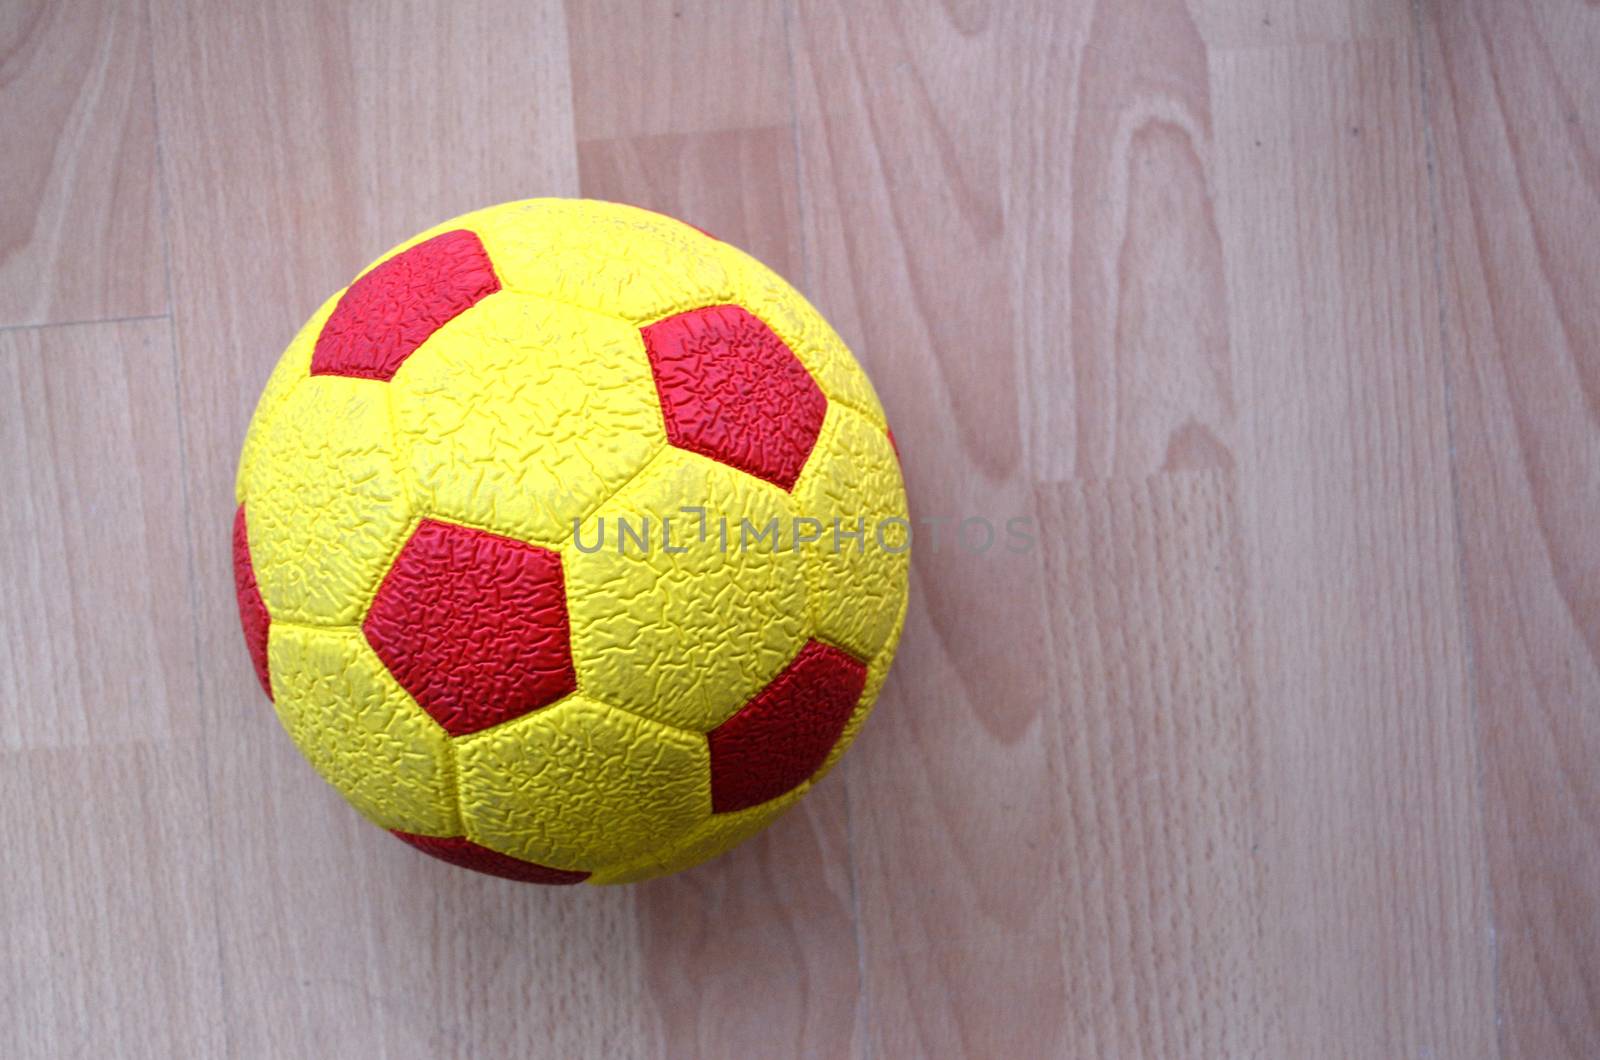 Red and yellow Soccer Ball on a wood by nehru